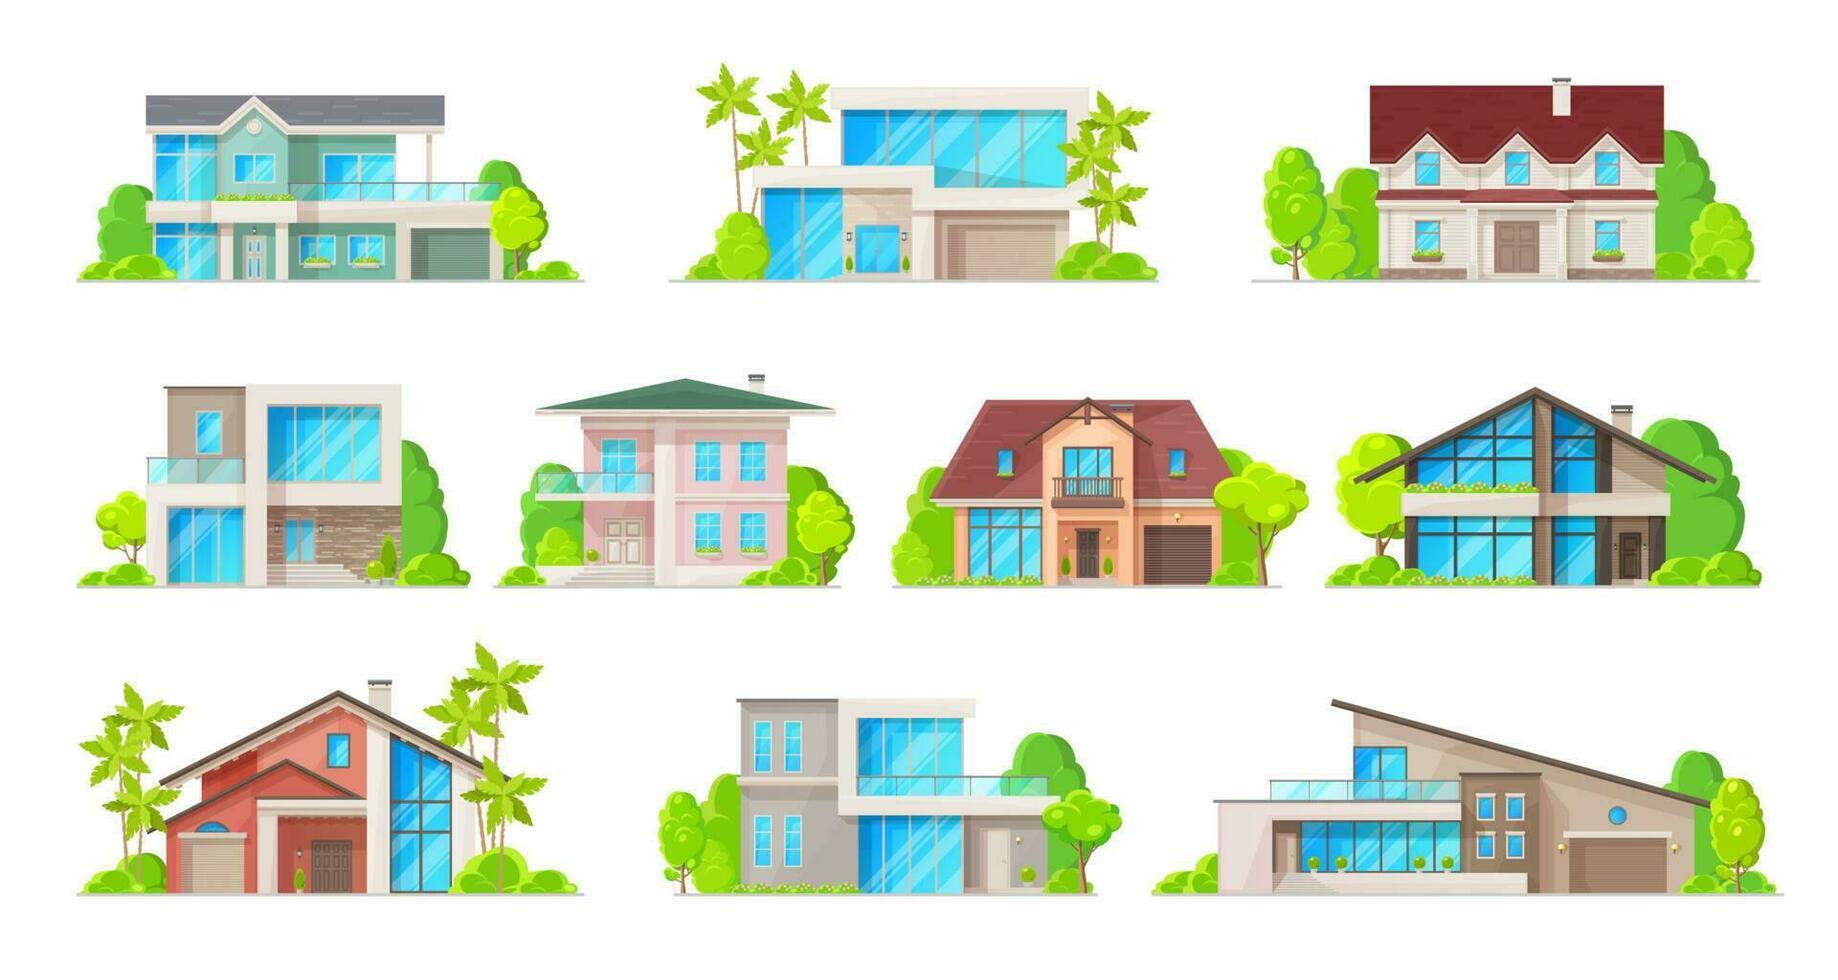 Building icons of real estate houses and cottages vector